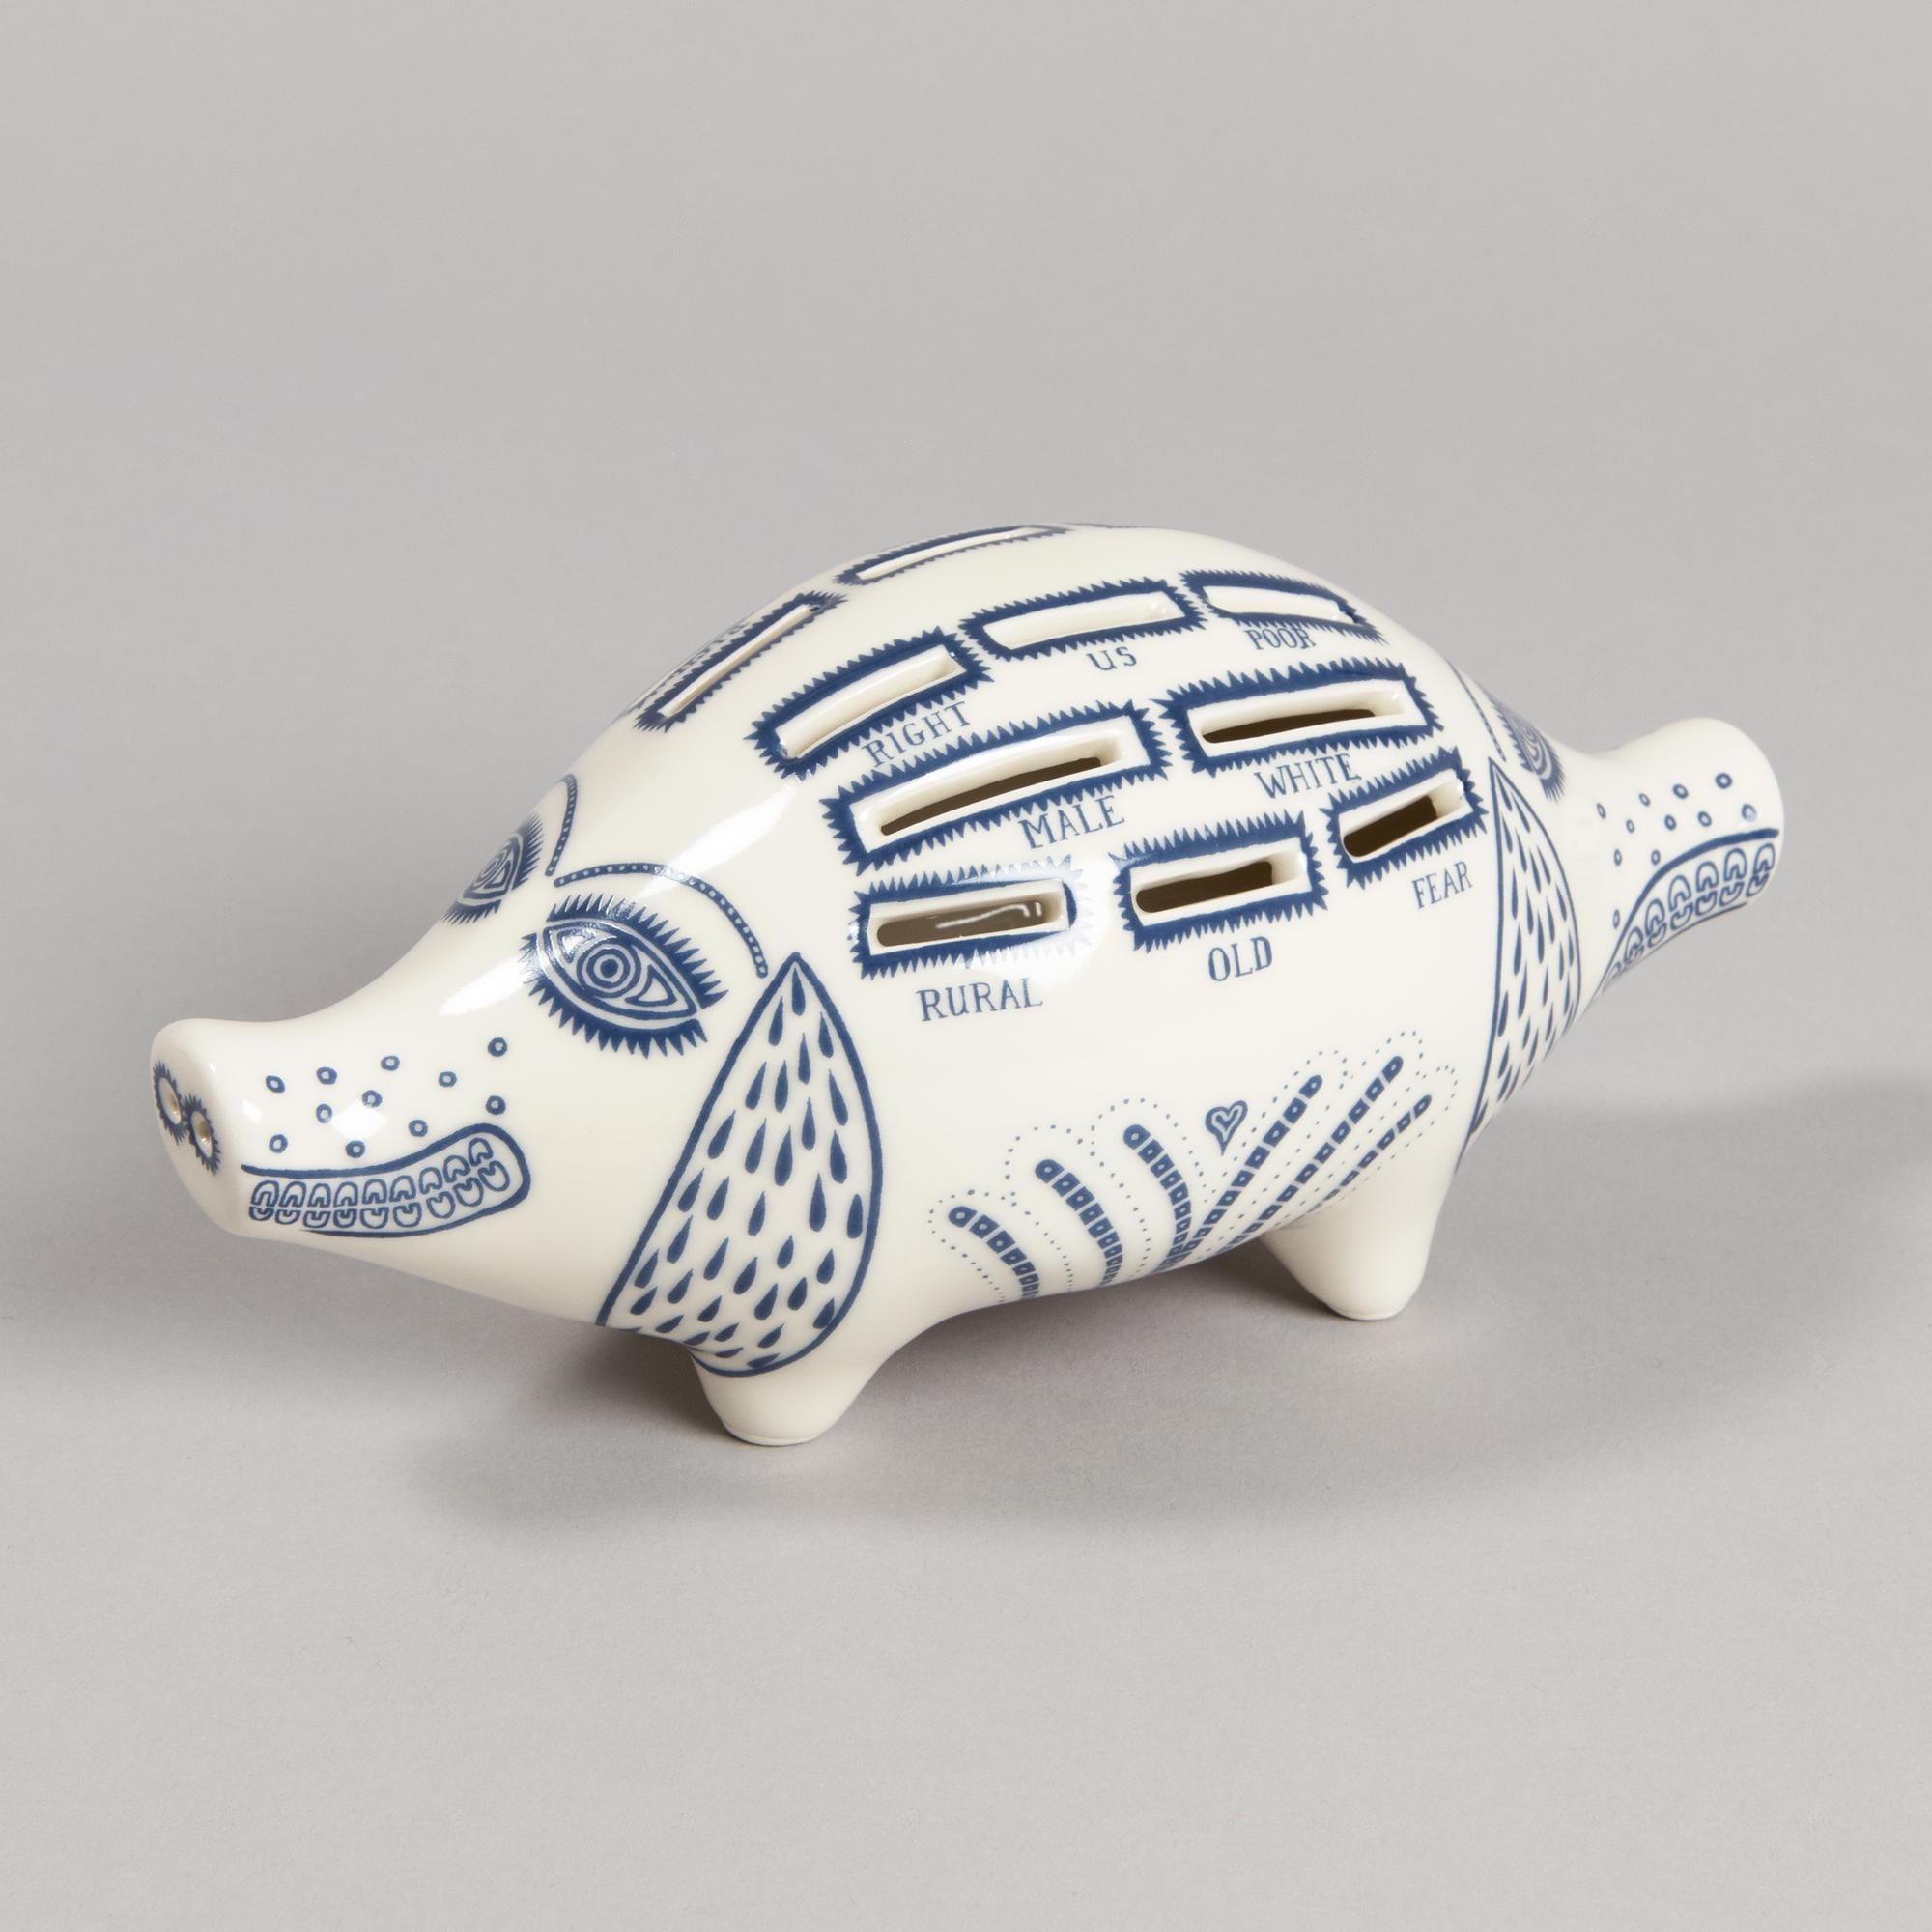 Grayson Perry (British, b. 1960)
Piggy Bank, 2017-2022
Medium: Ceramic piggy bank in blue and white with rubber stopper
Dimensions: 19 × 10 × 9 cm
Edition size: Unknown; Stamped with the artist’s logo on the underside